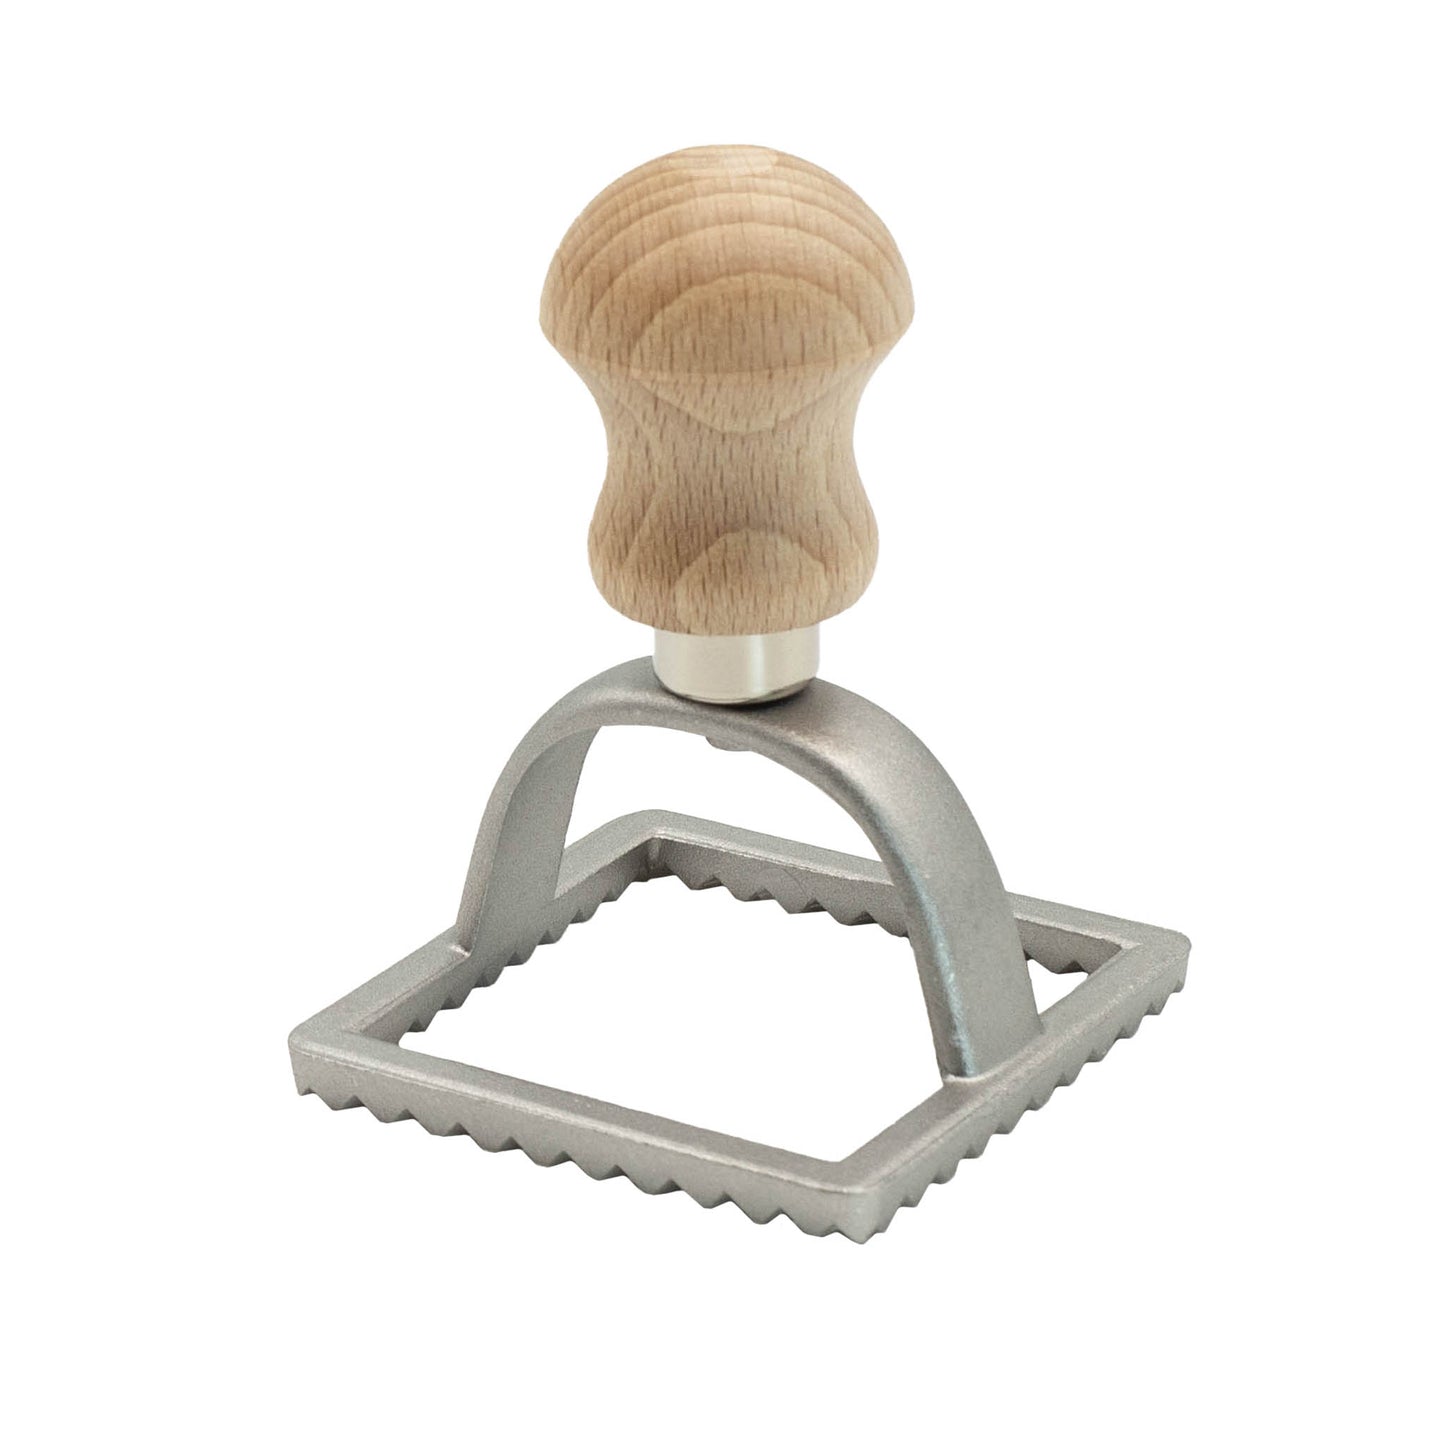 Italian made square ravioli cutter with wooden handle. 